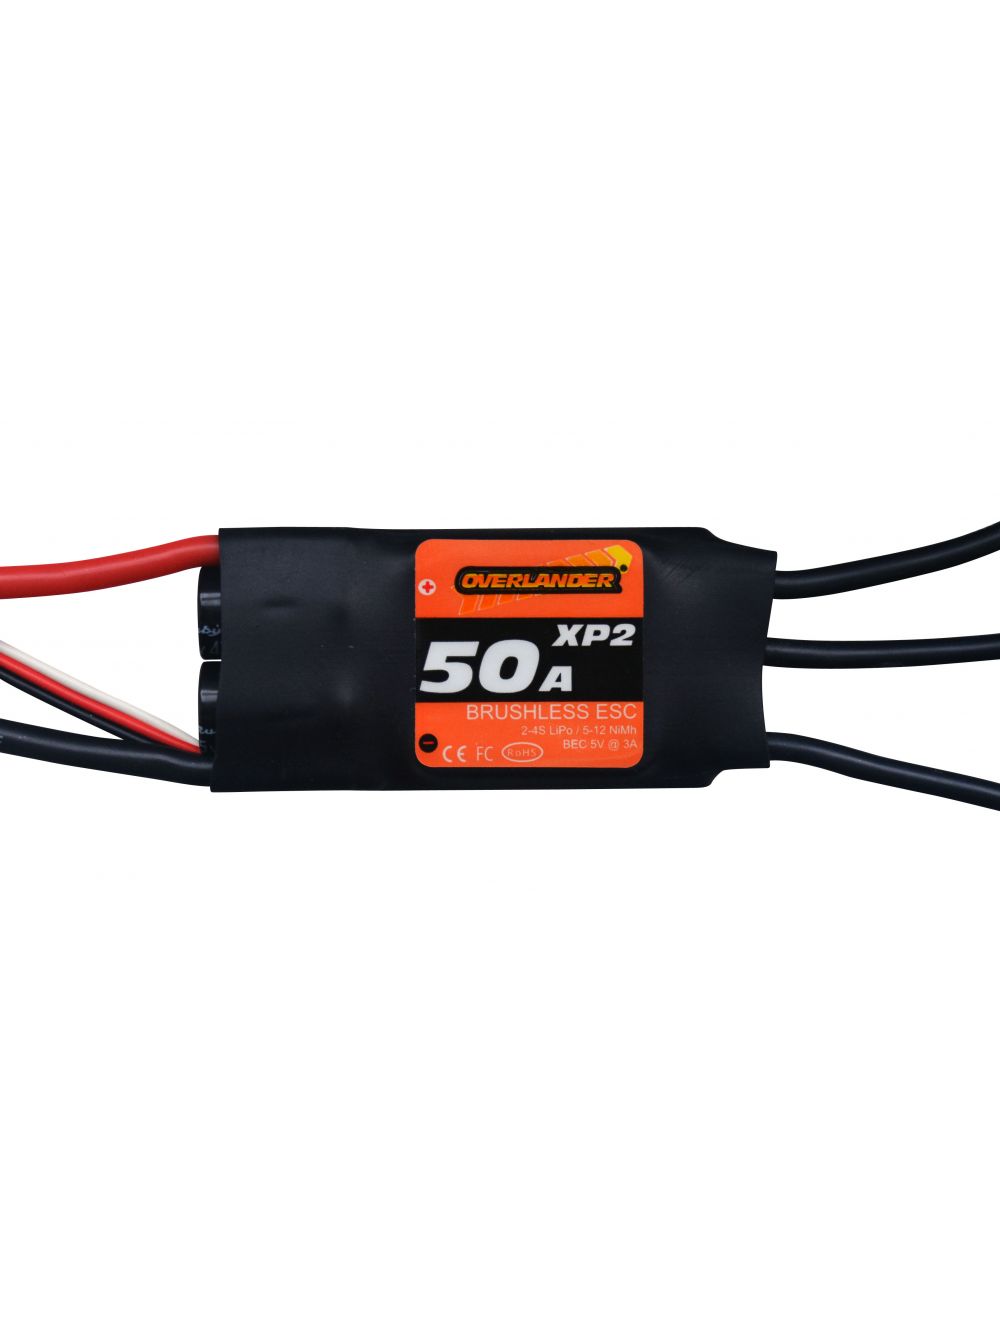 Overlander XP2 50A Brushless Speed Controller 3278